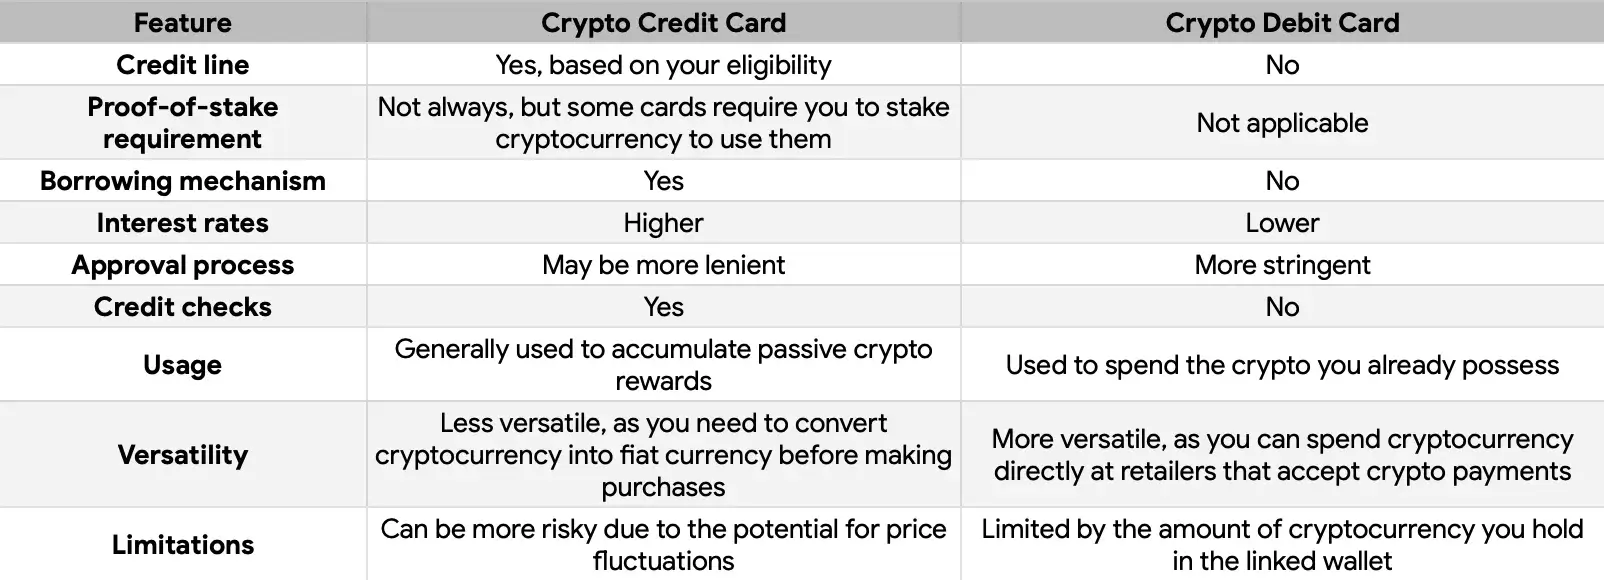 The Main Differences Between Crypto Credit Cards vs. Crypto Debit Cards